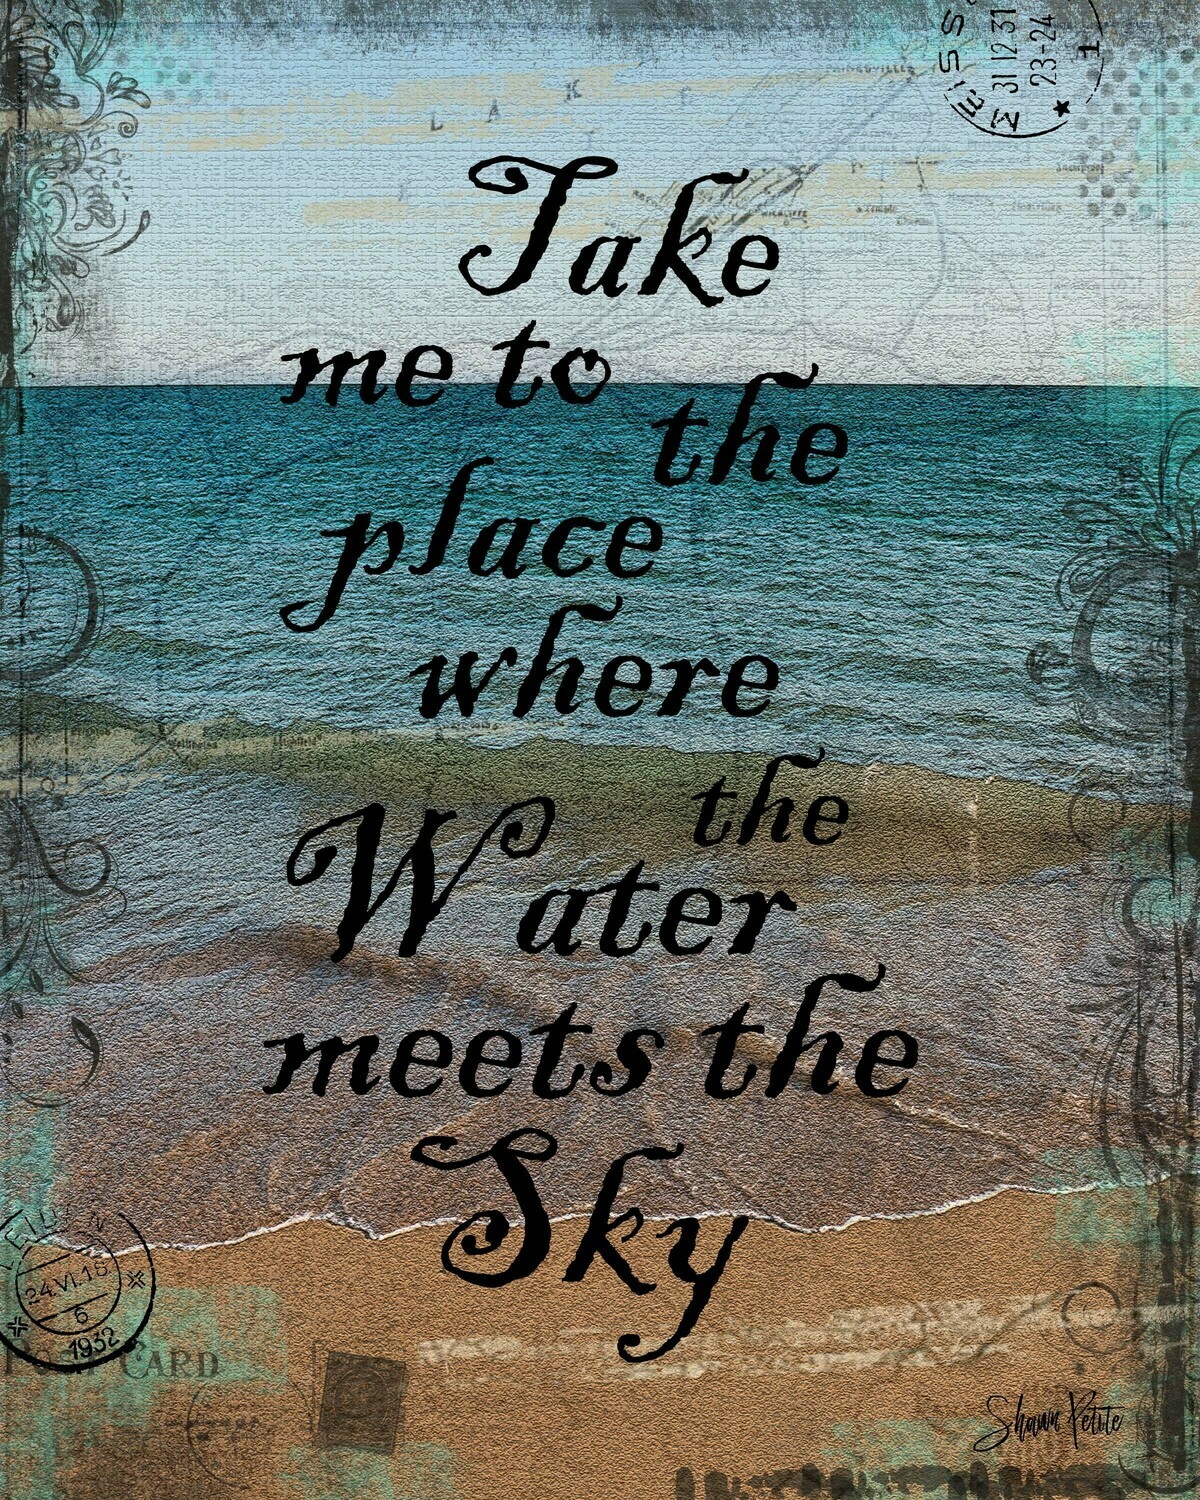 "Take me to the place where the water meets the sky" Print on Wood 5x7 Overstock